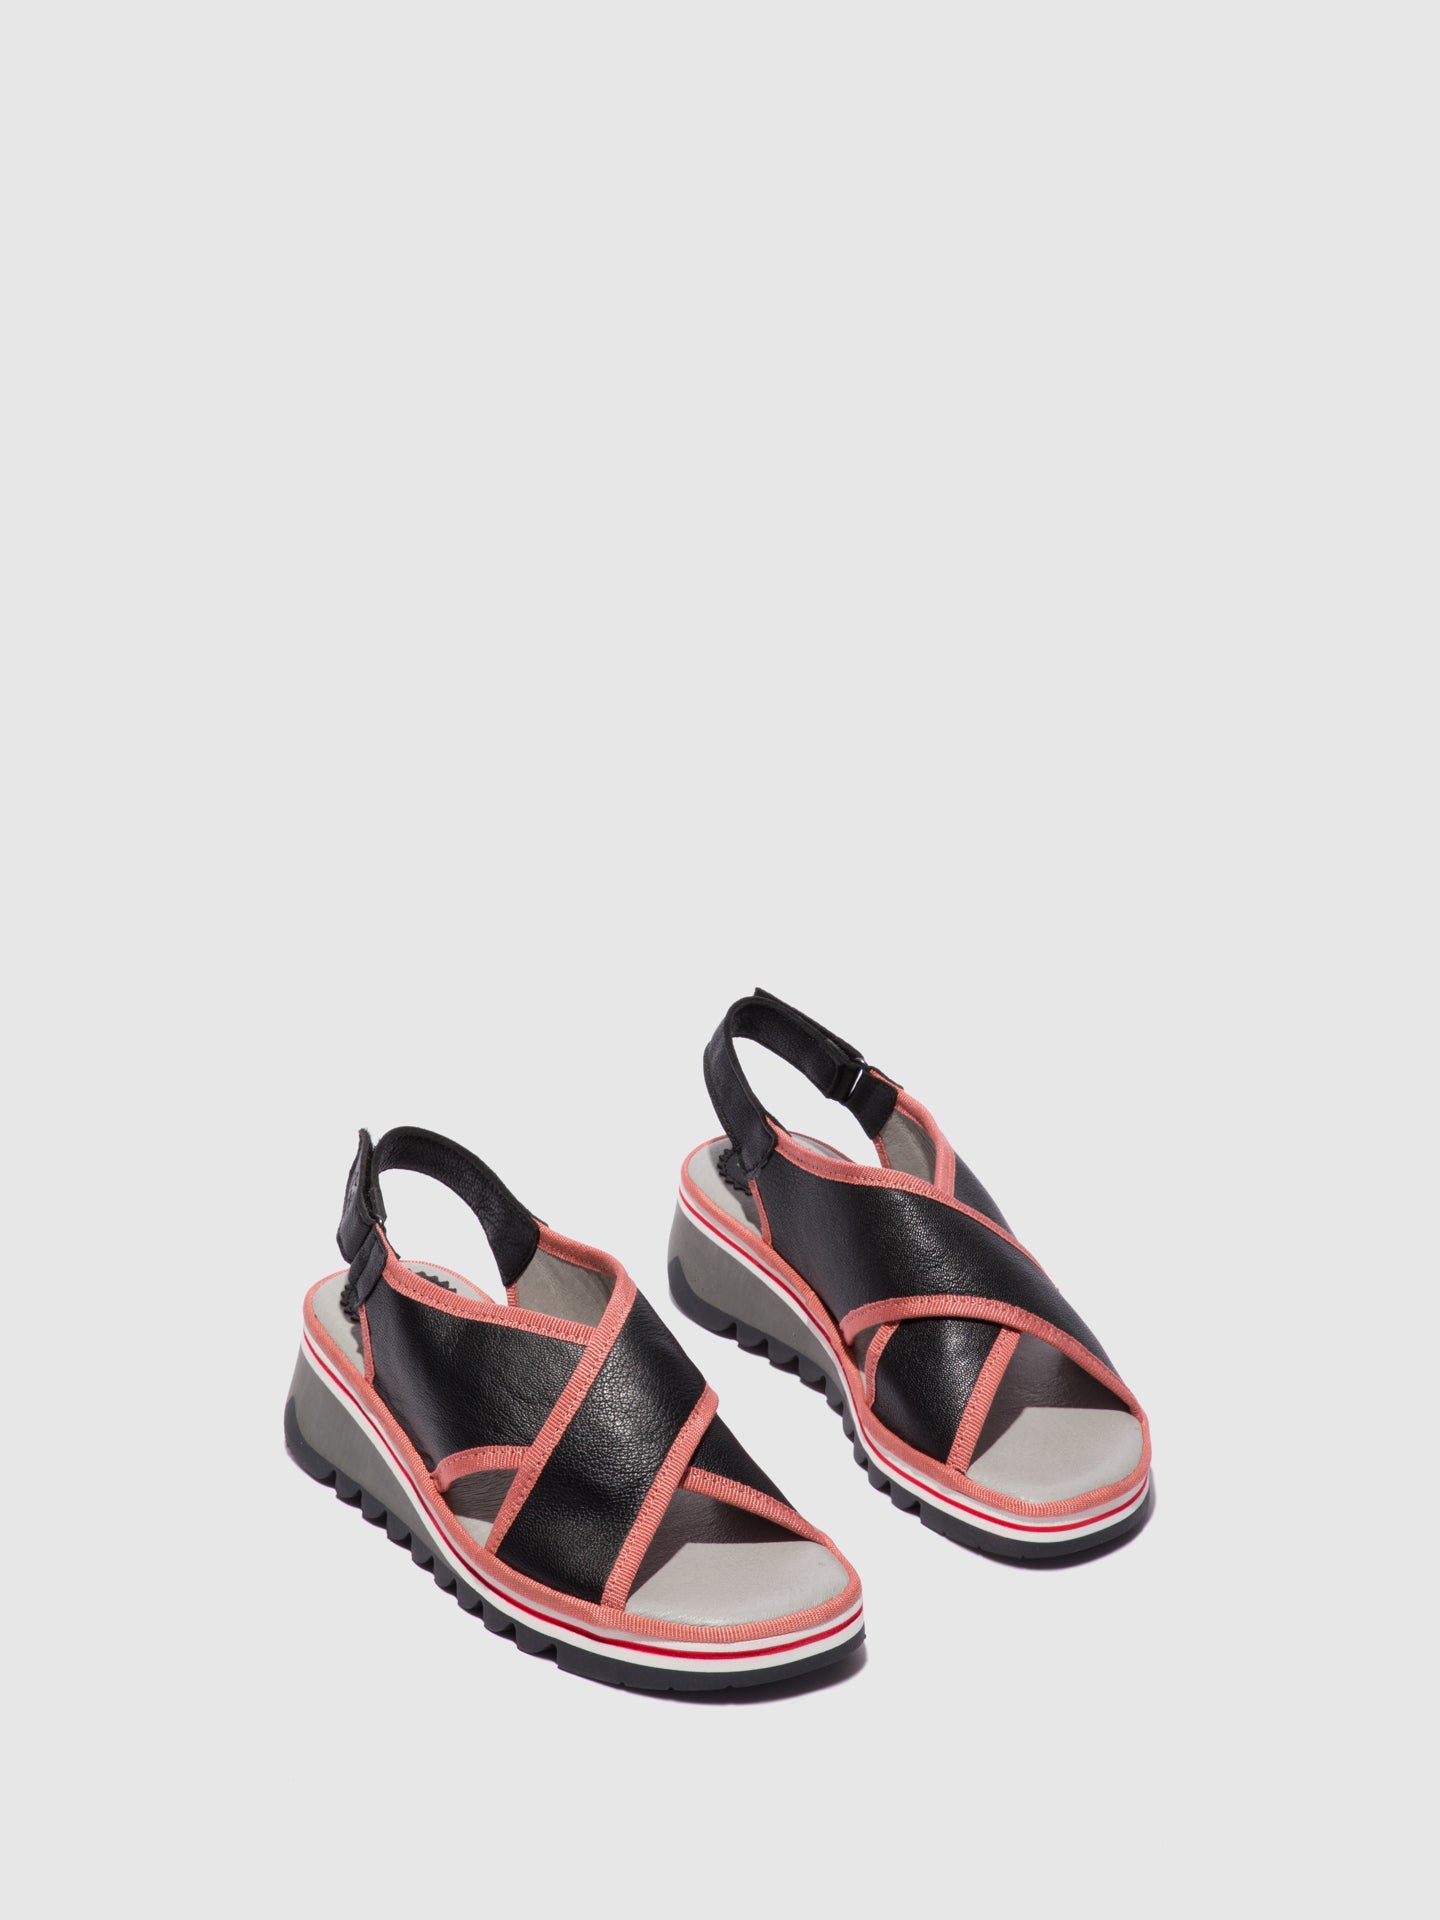 Fly London Crossover Sandals TANO133FLY BLACK (PINK)